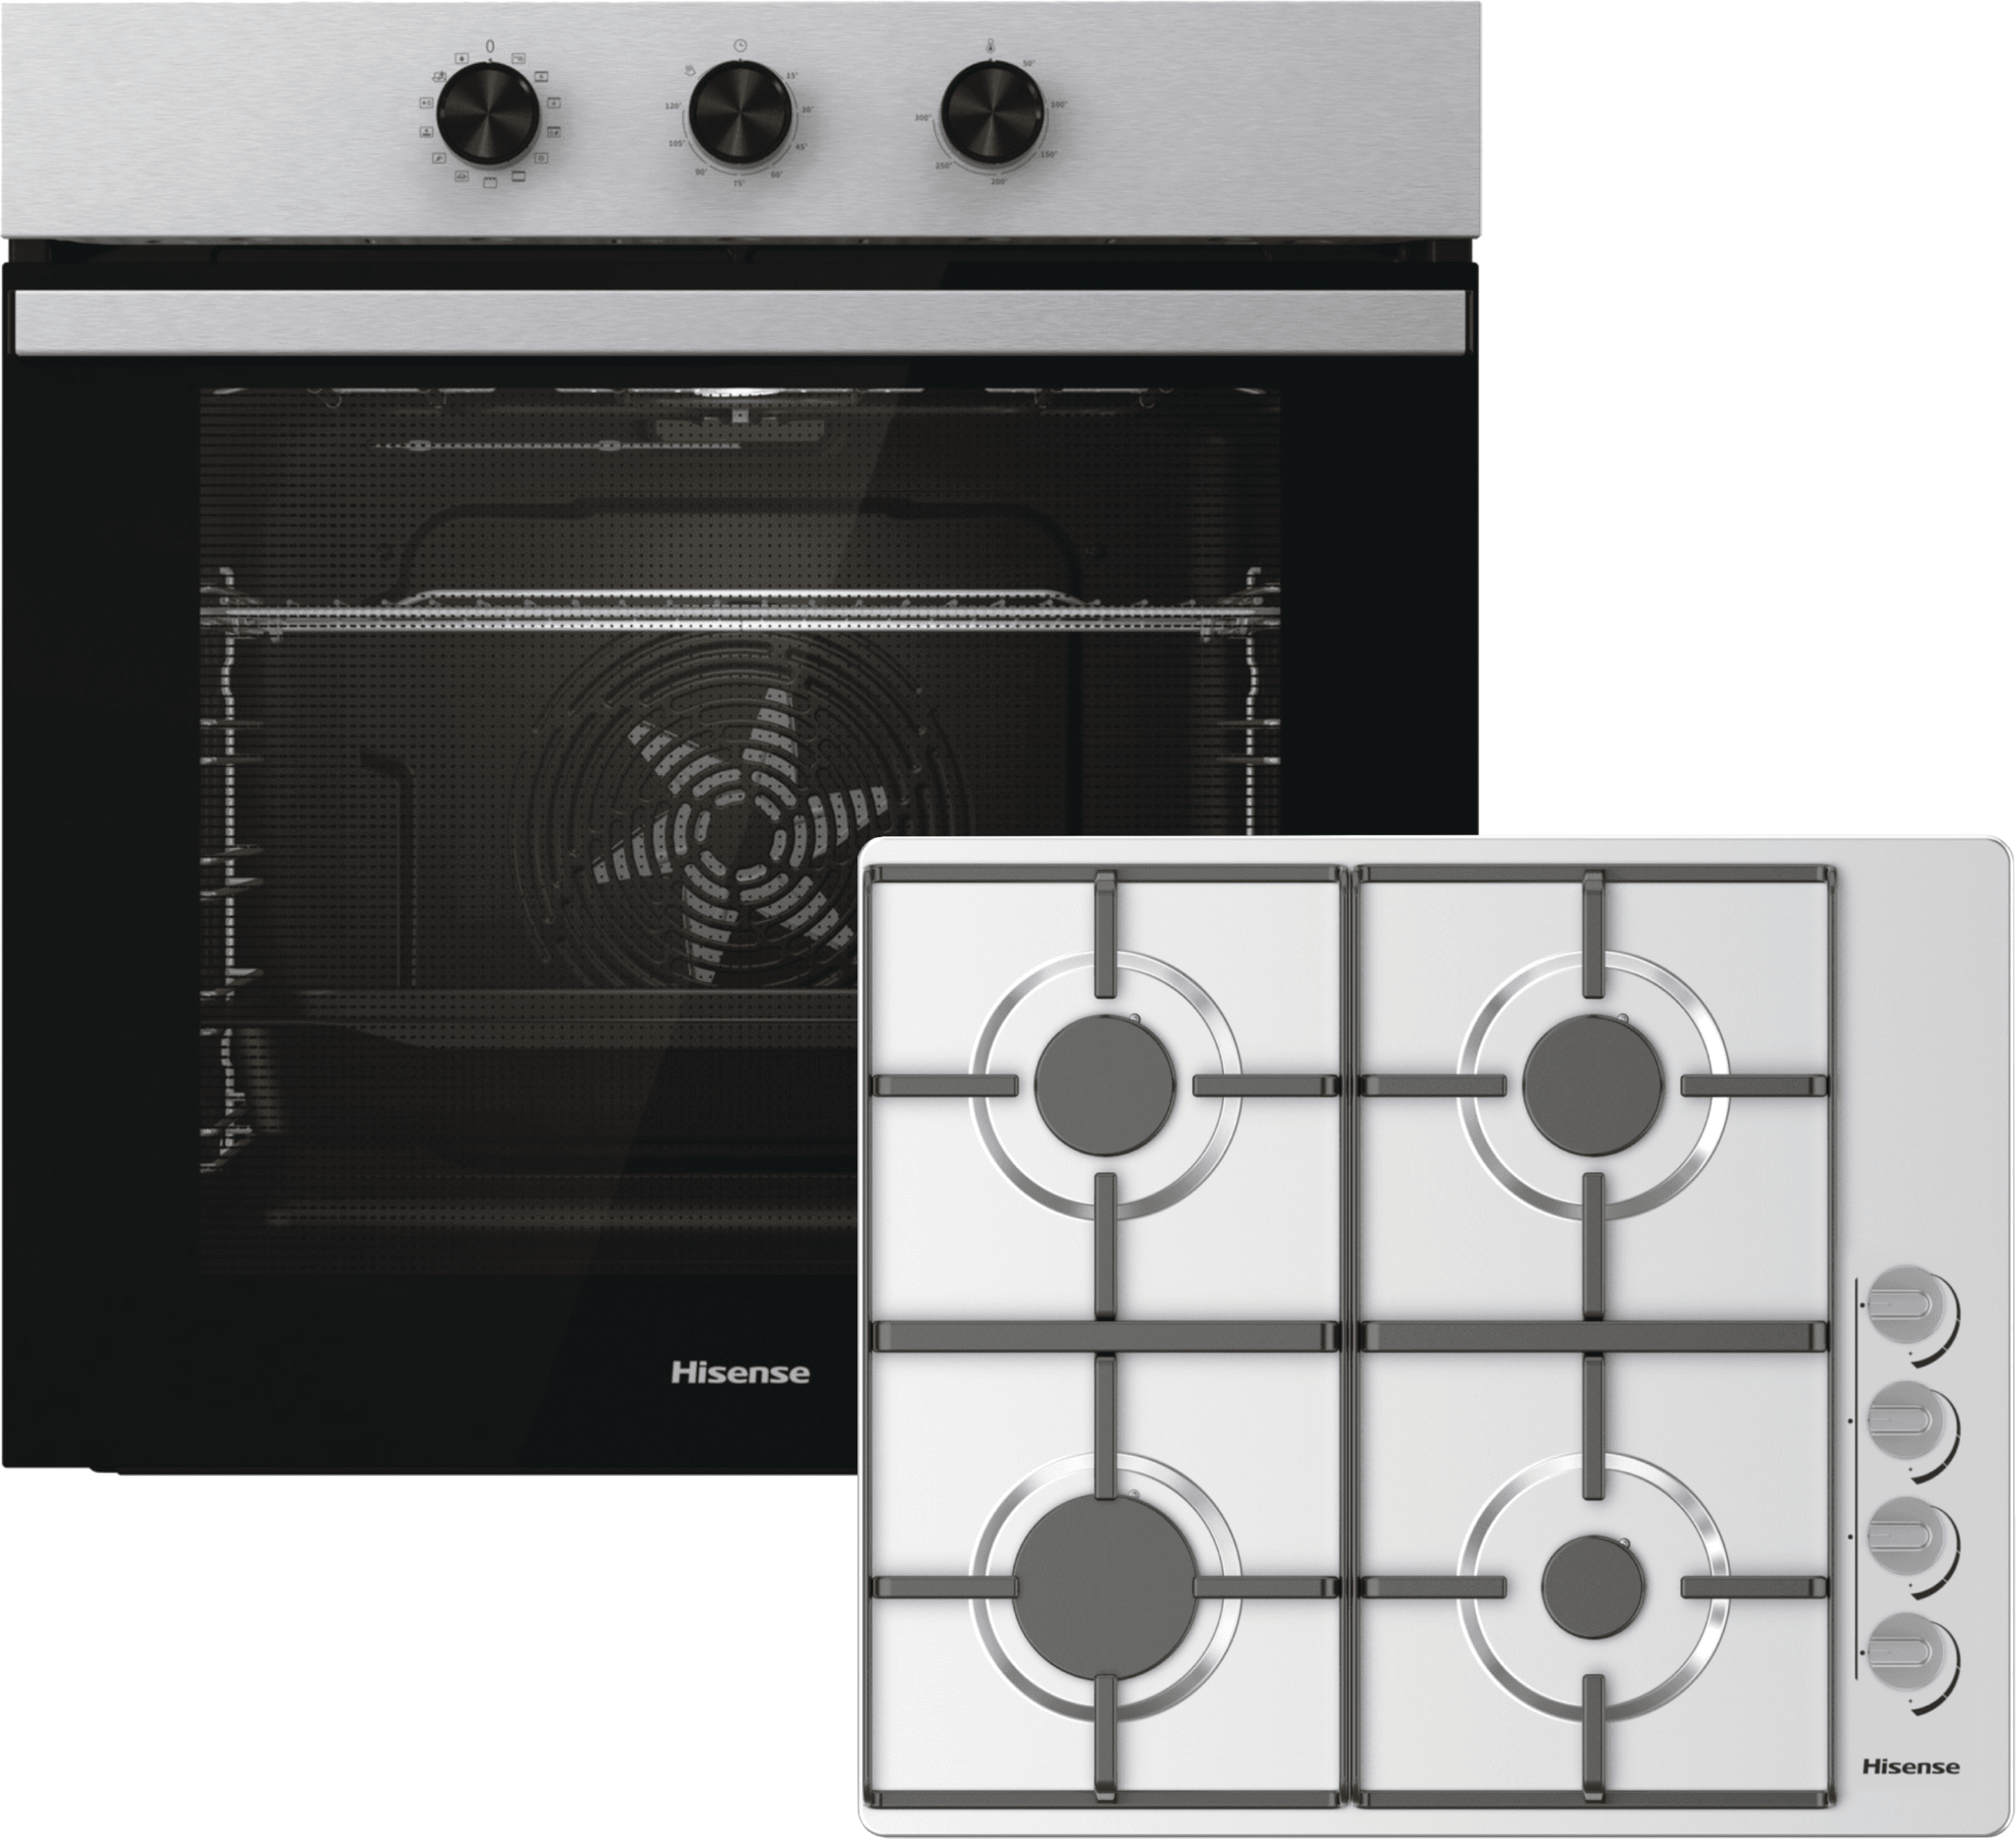 Hisense BI6061HGSUK Built In Electric Single Oven and Gas Hob Pack - Stainless Steel - A Rated, Stainless Steel